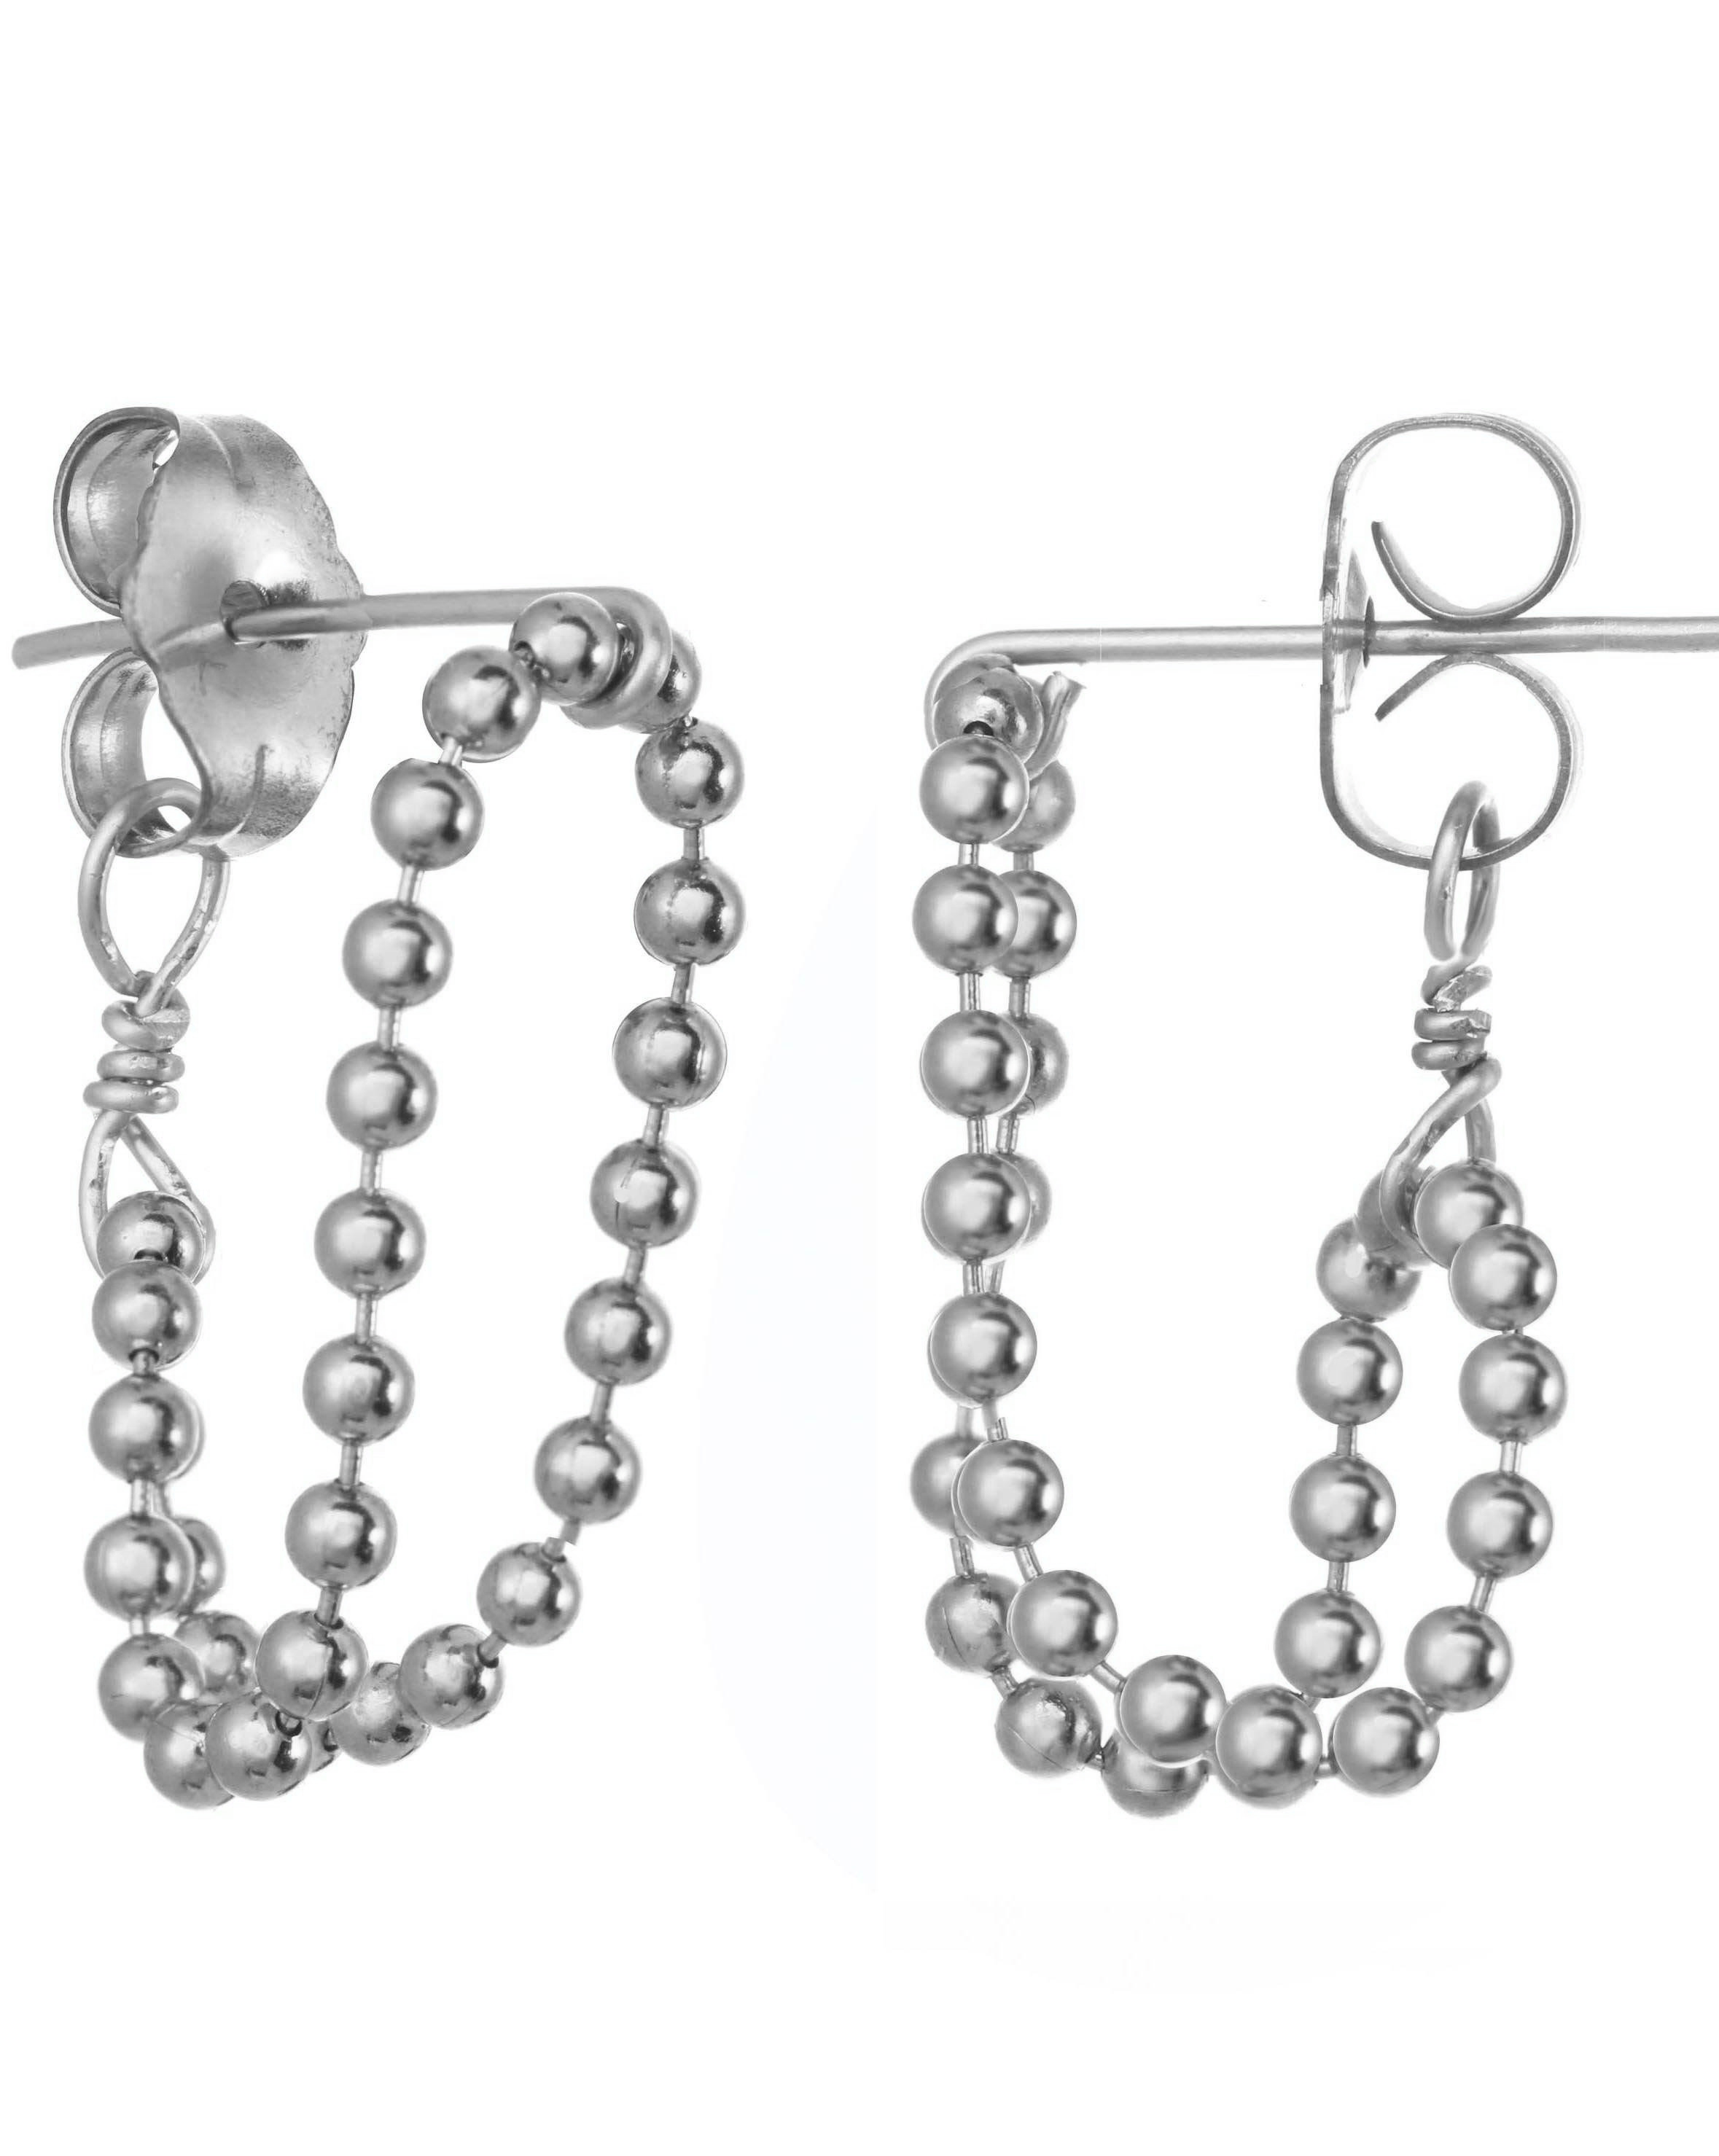 Venla Huggie Earrings by KOZAKH. Stud earrings, crafted in Sterling Silver, featuring a strand of 1mm seamless beads.